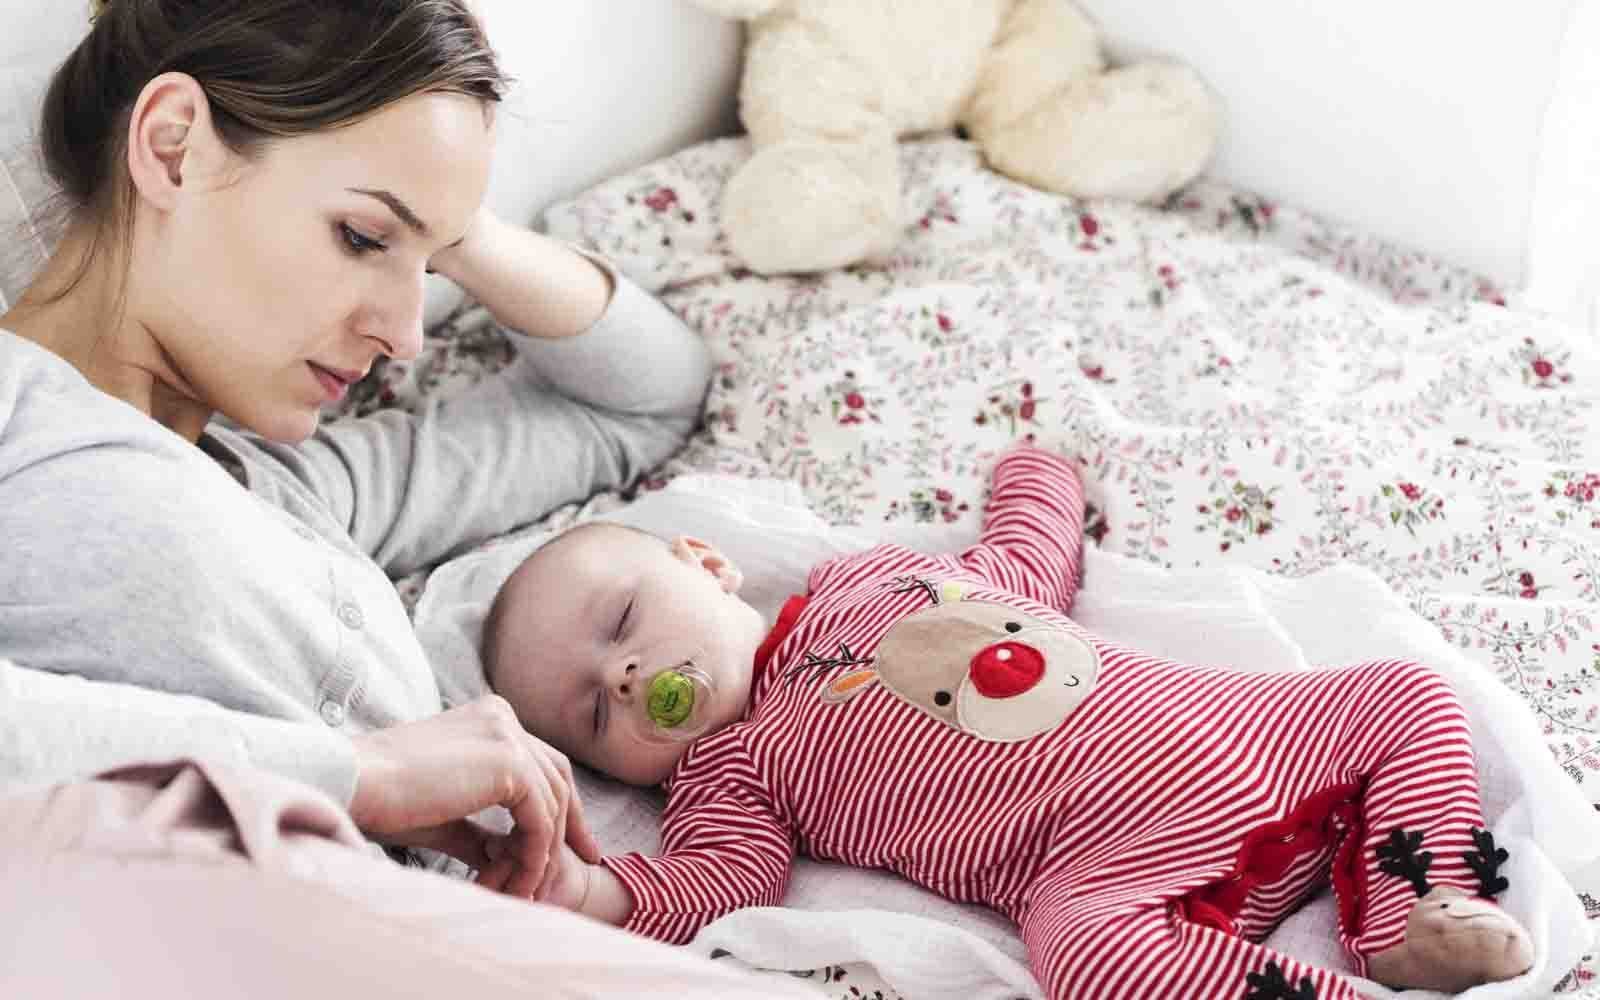 Your baby's ever-changing sleep development